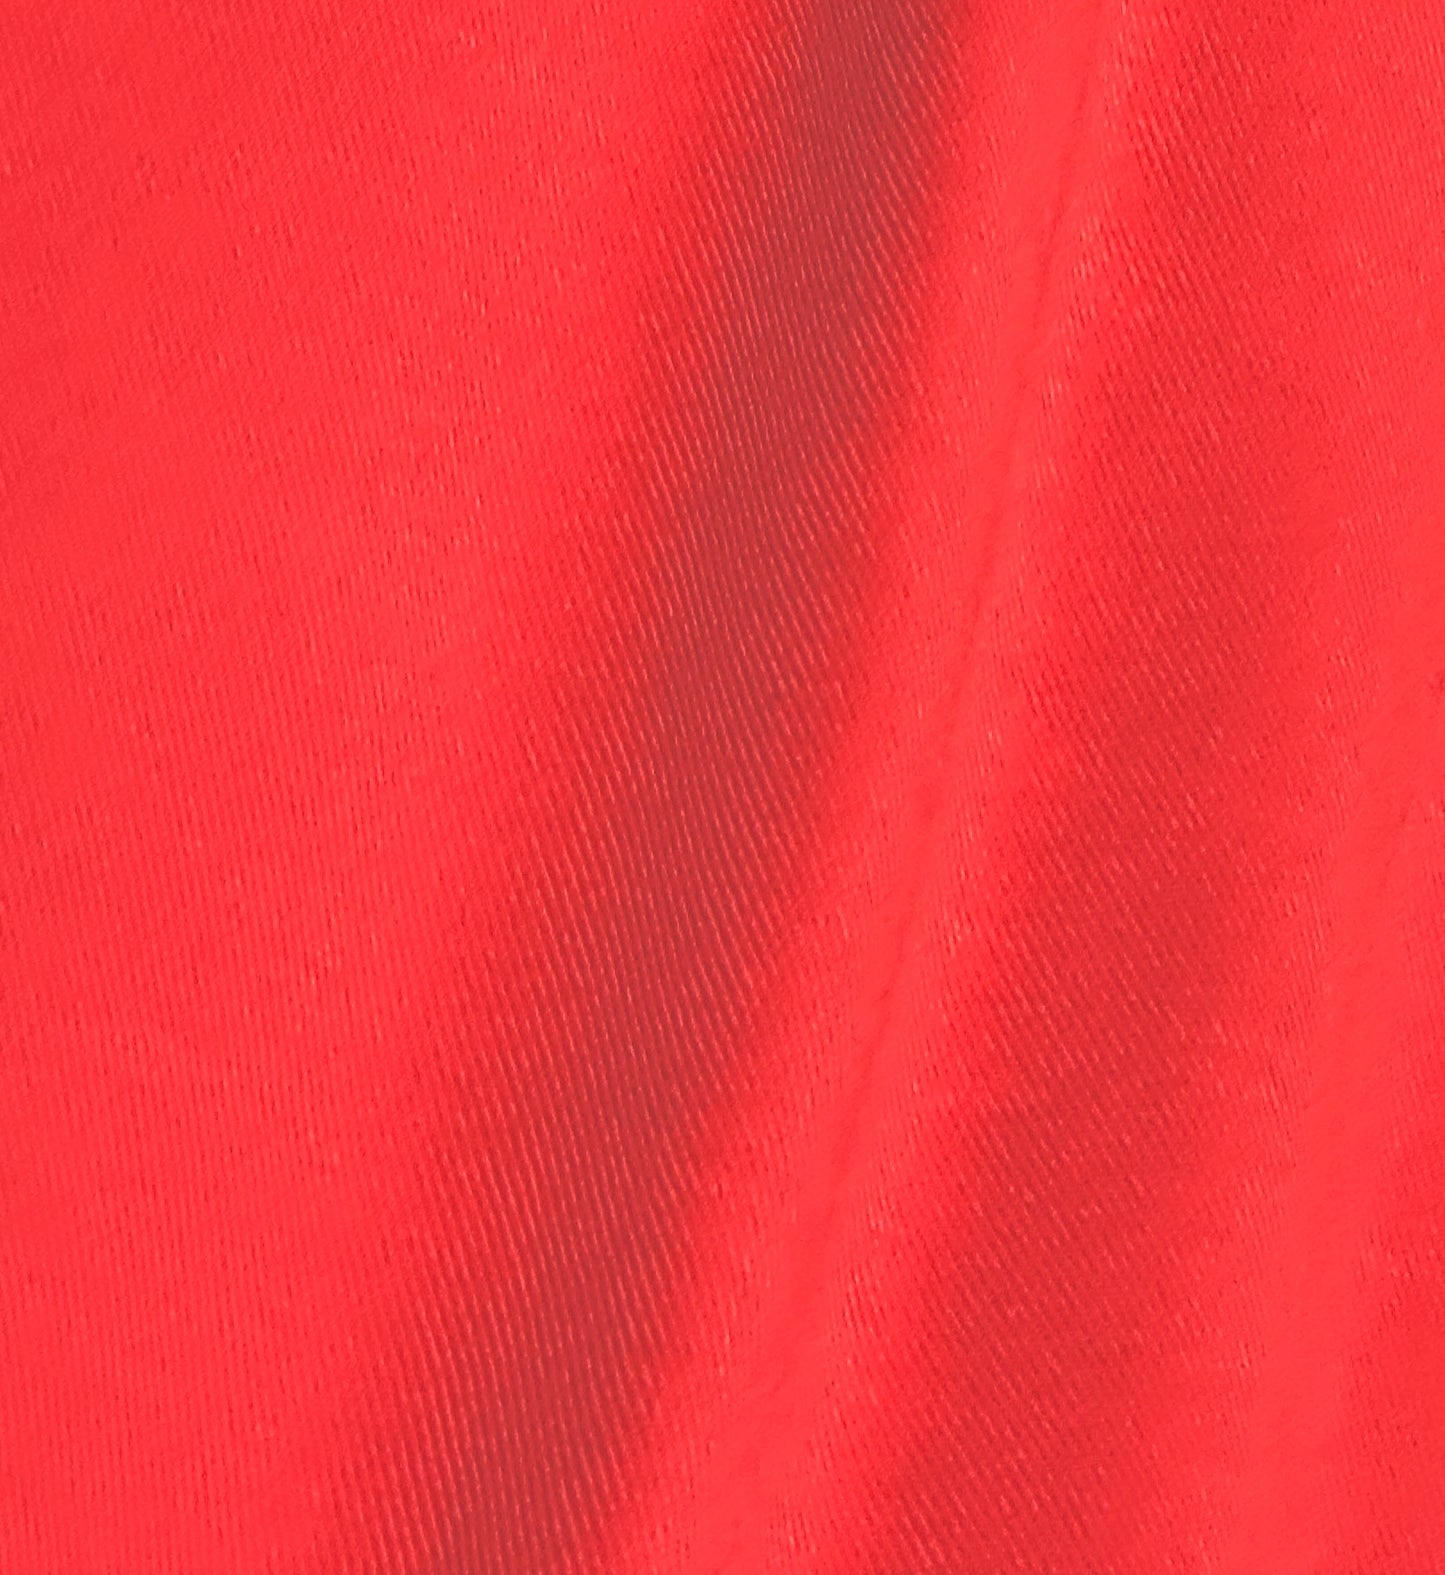 BRIGHT RED RIB 1X1 FABRIC 100% SOFT ORGANIC COTTON 8 OZS 70" WIDE BY THE YARD